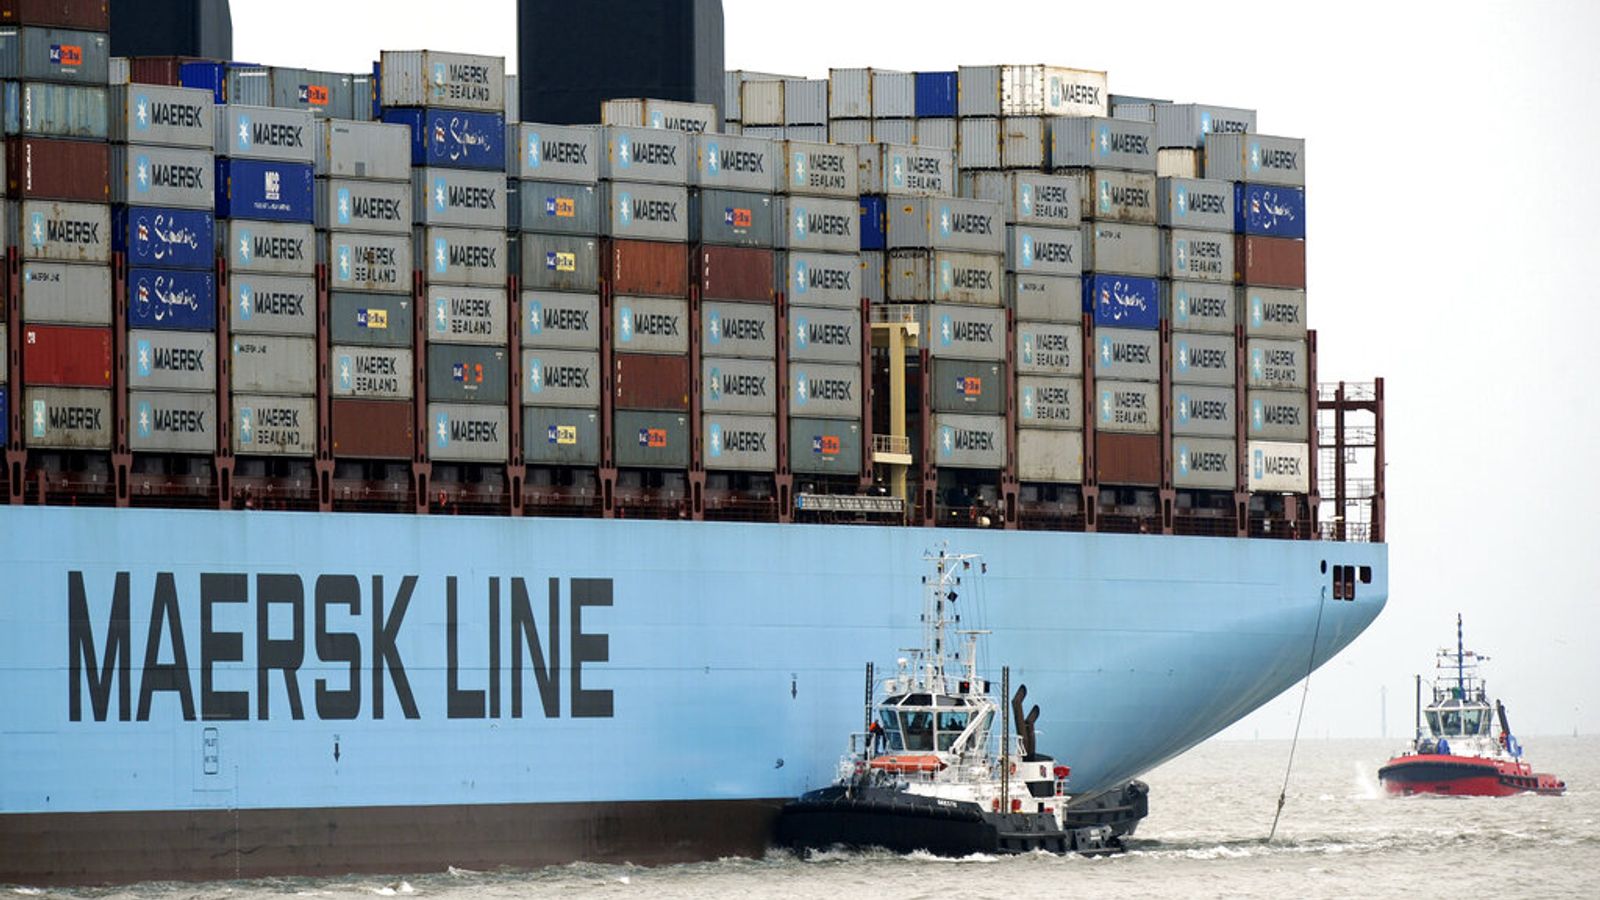 Shipping giant Maersk's ominous warning of 'dark clouds on horizon' indicates trade is slowing globally